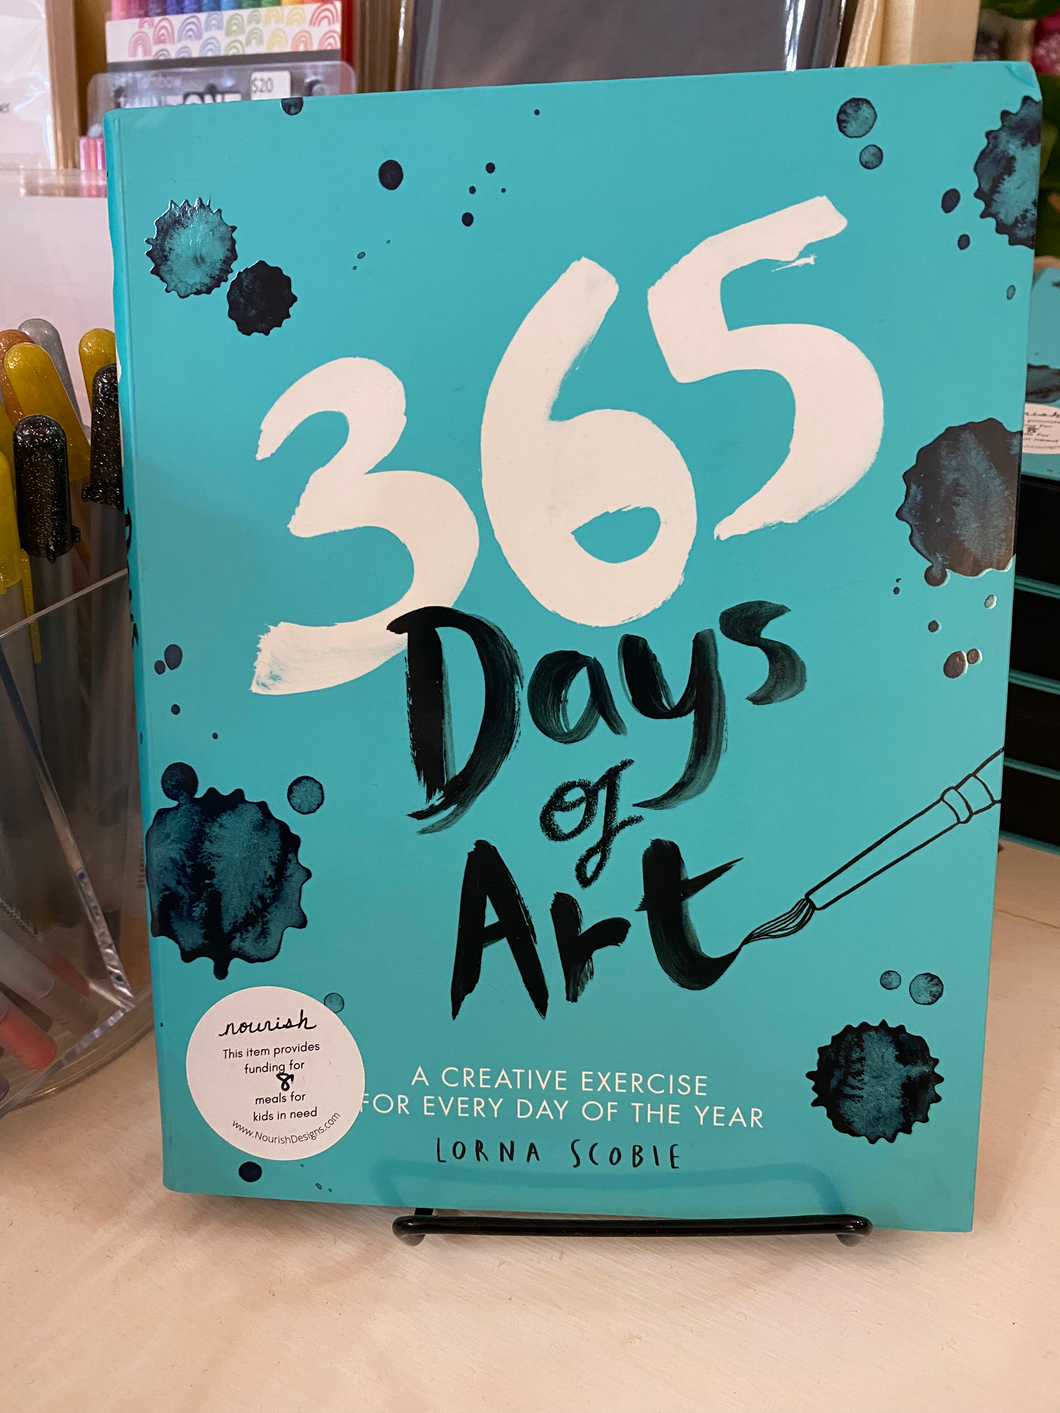 Image of the book cover for 365 Days of Art